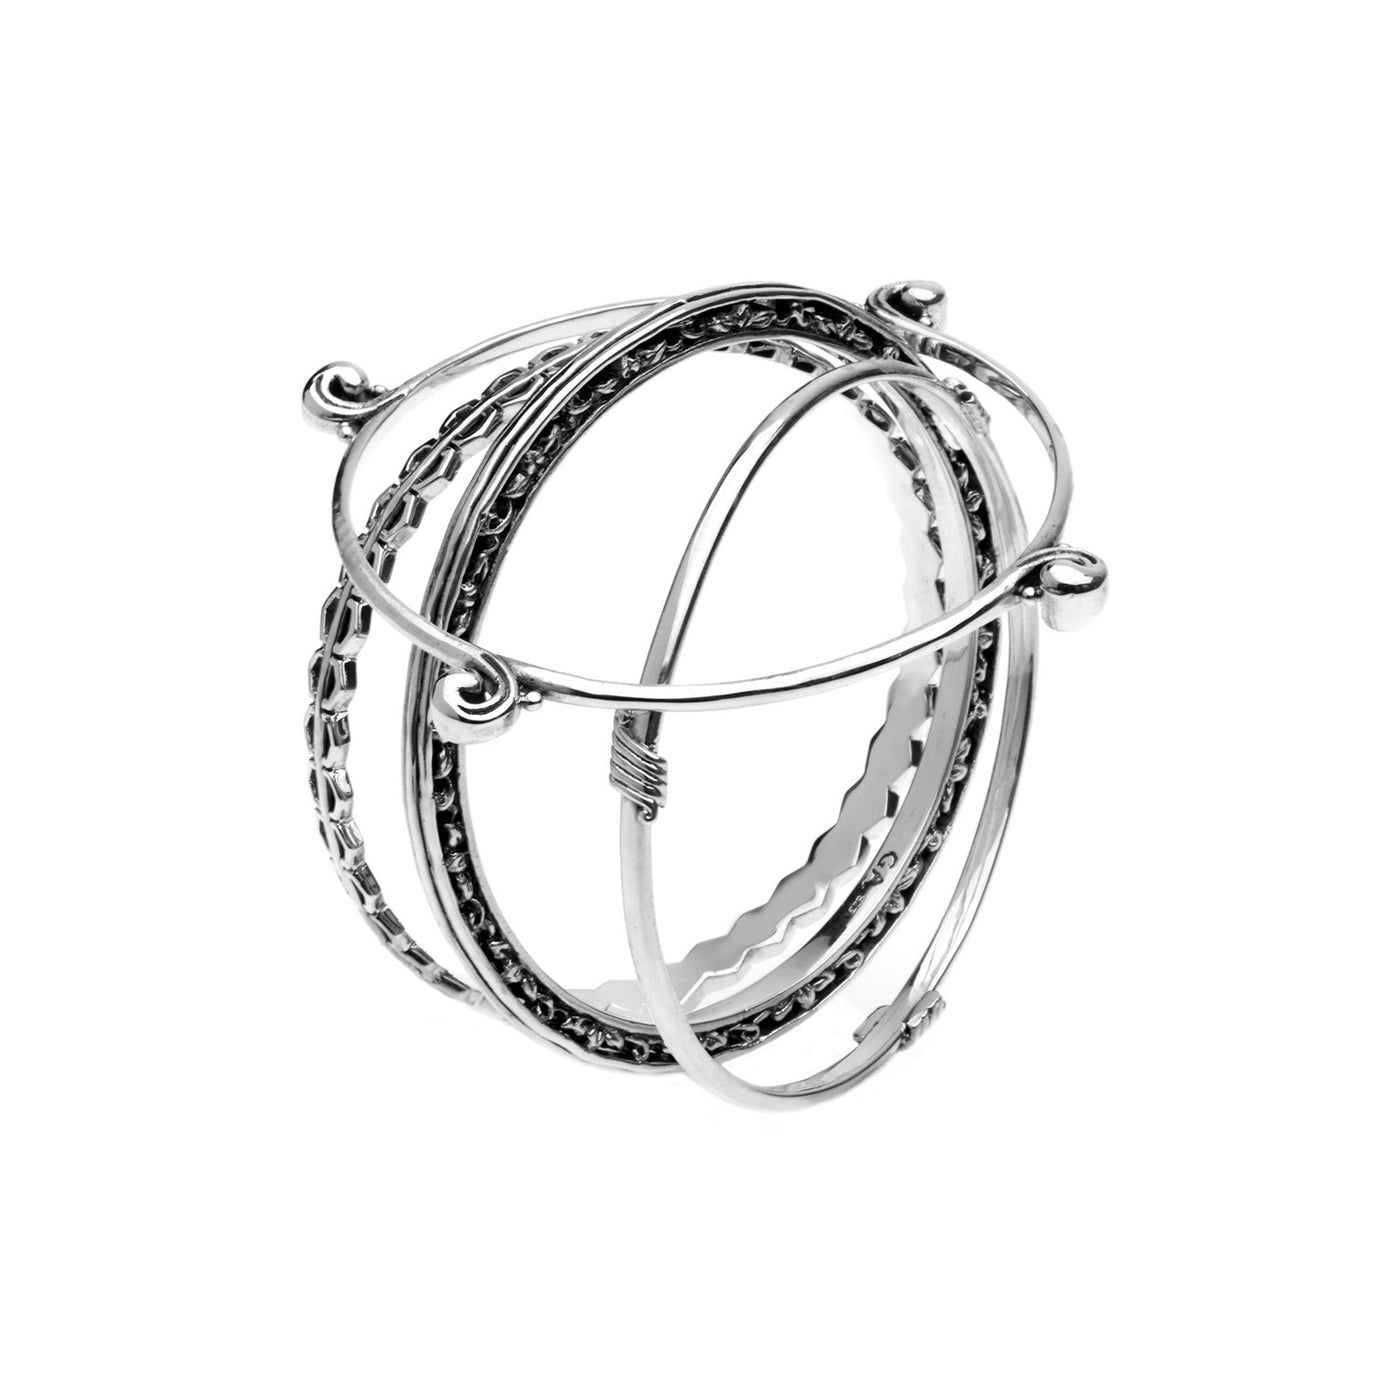 Elements Earth, Fire, Wind & Water Sterling Silver Bangles - Cynthia Gale New York Jewelry